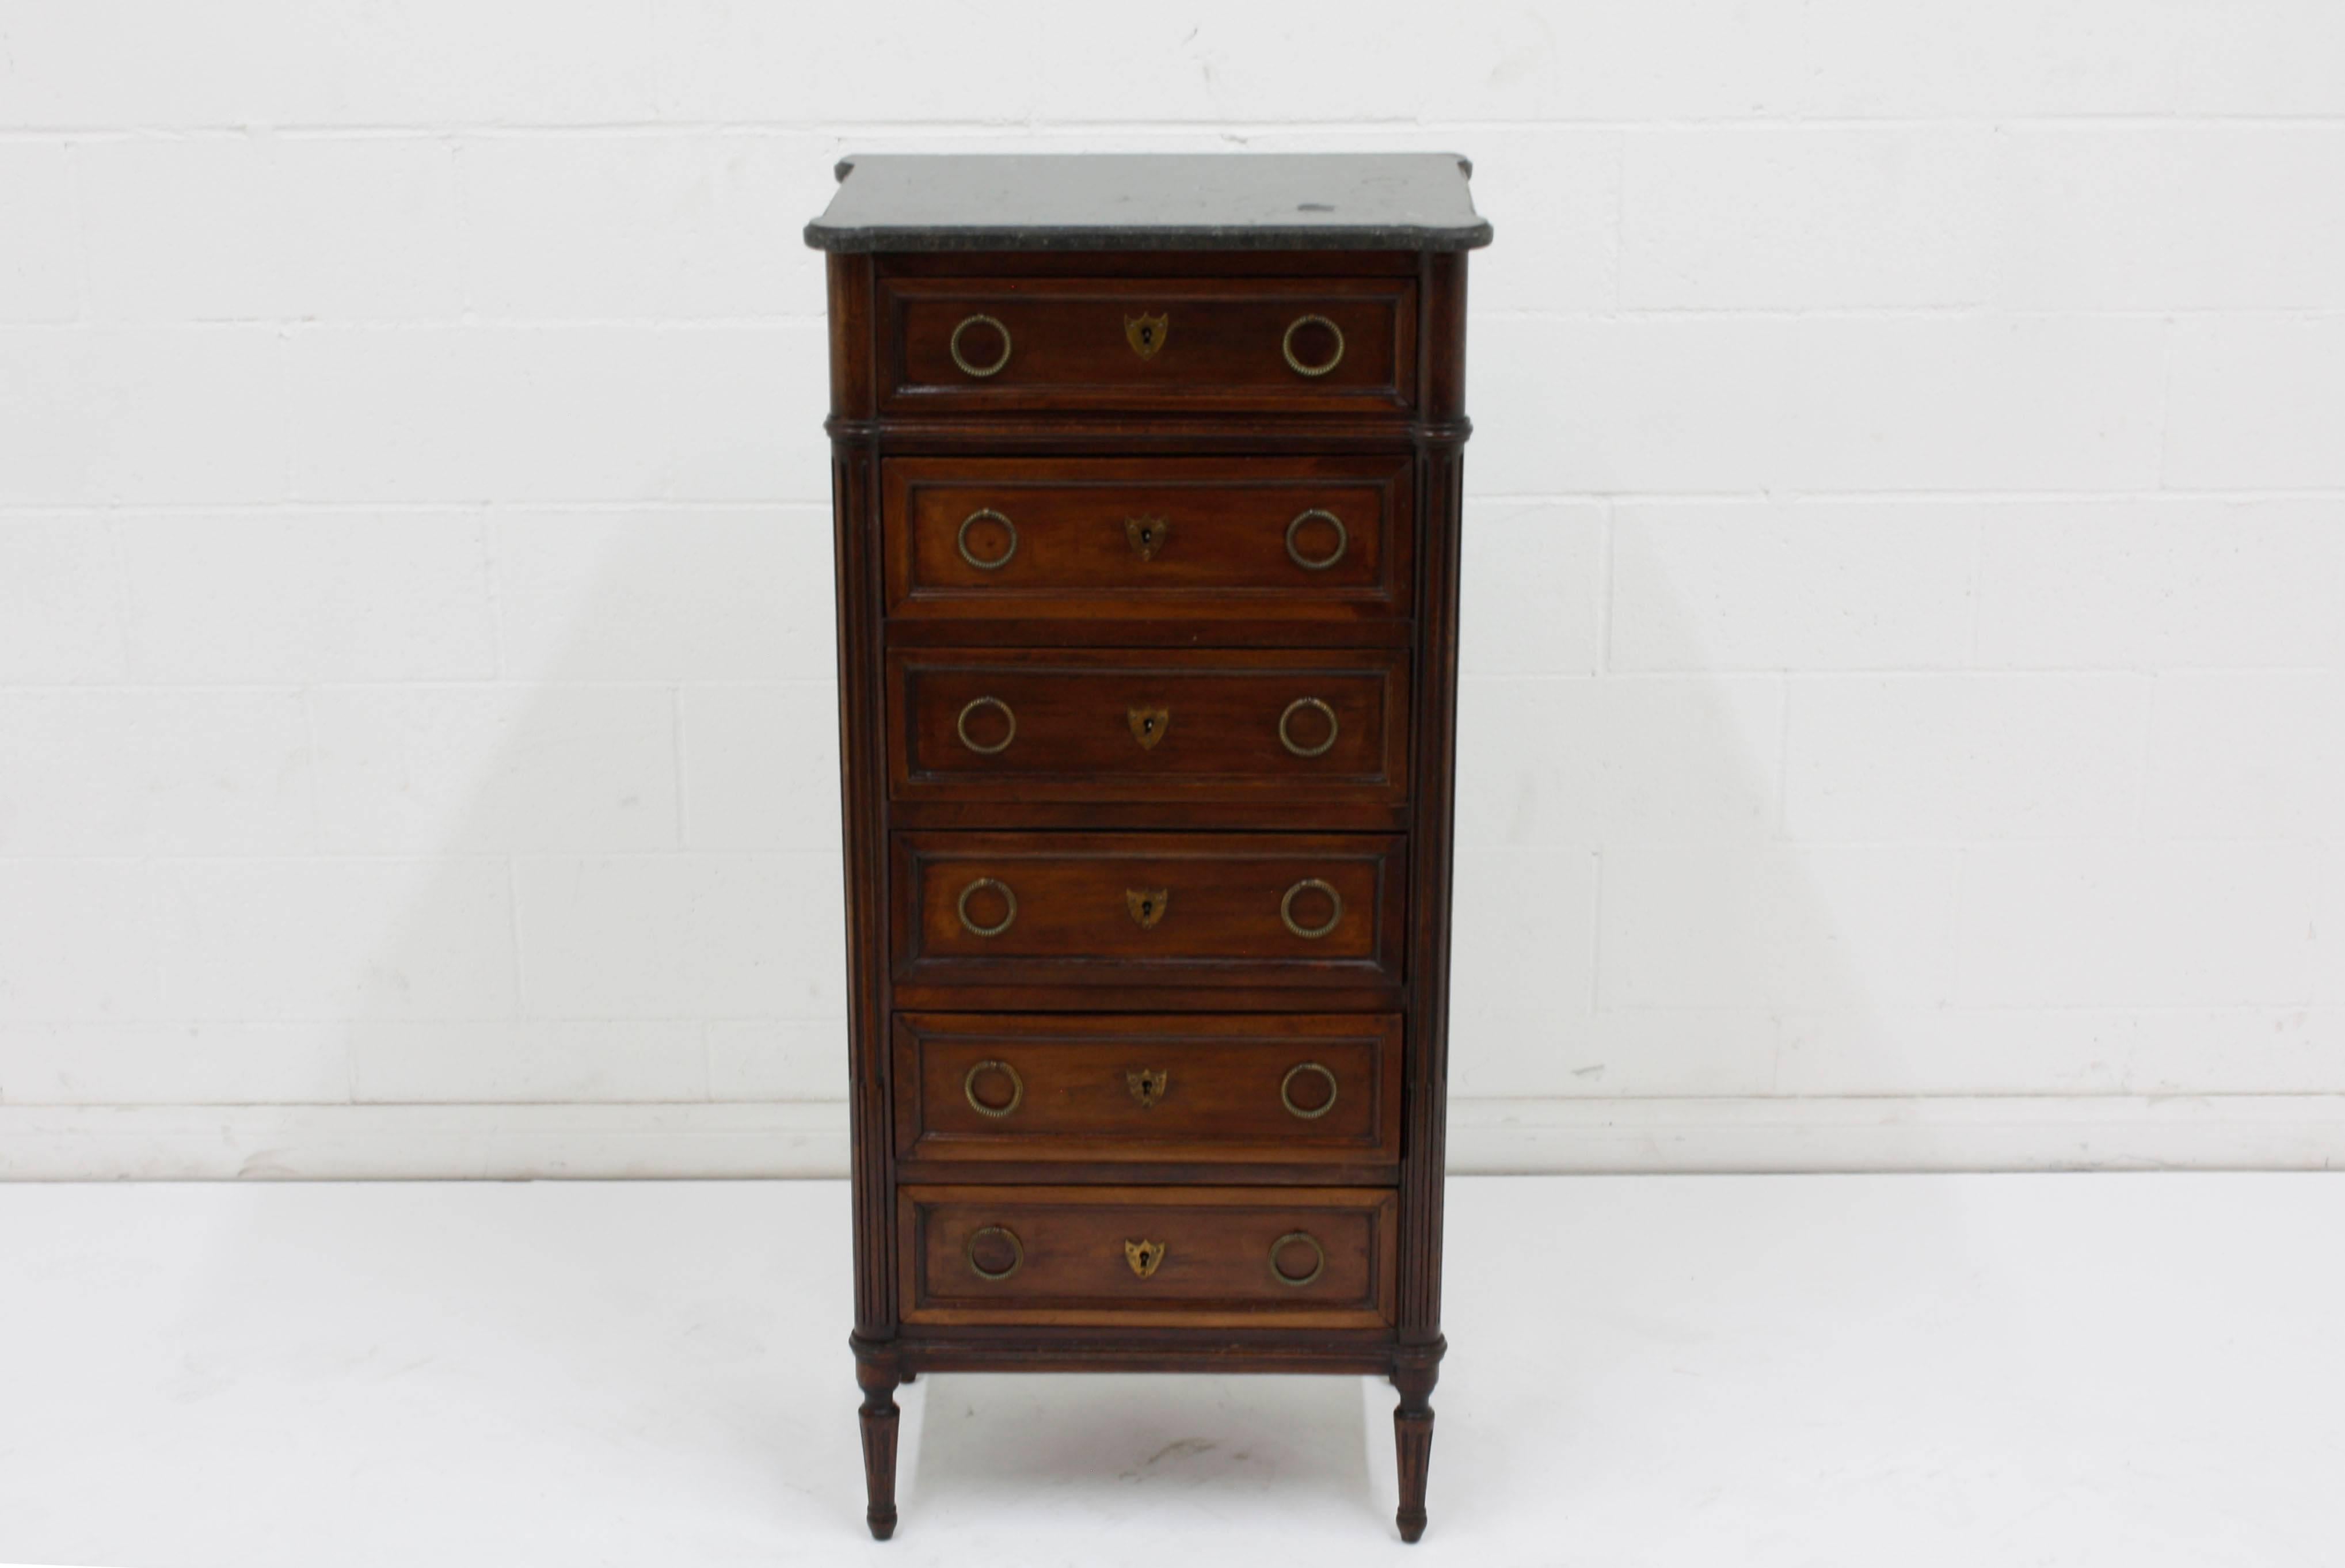 This 1890s French Louis XVI-style chest of drawers is made of walnut wood stained in a rich walnut color with a lacquered finish. This chest has six drawers adorned with moulding and brass drawer pulls and keyhole plates. The corners of the chest